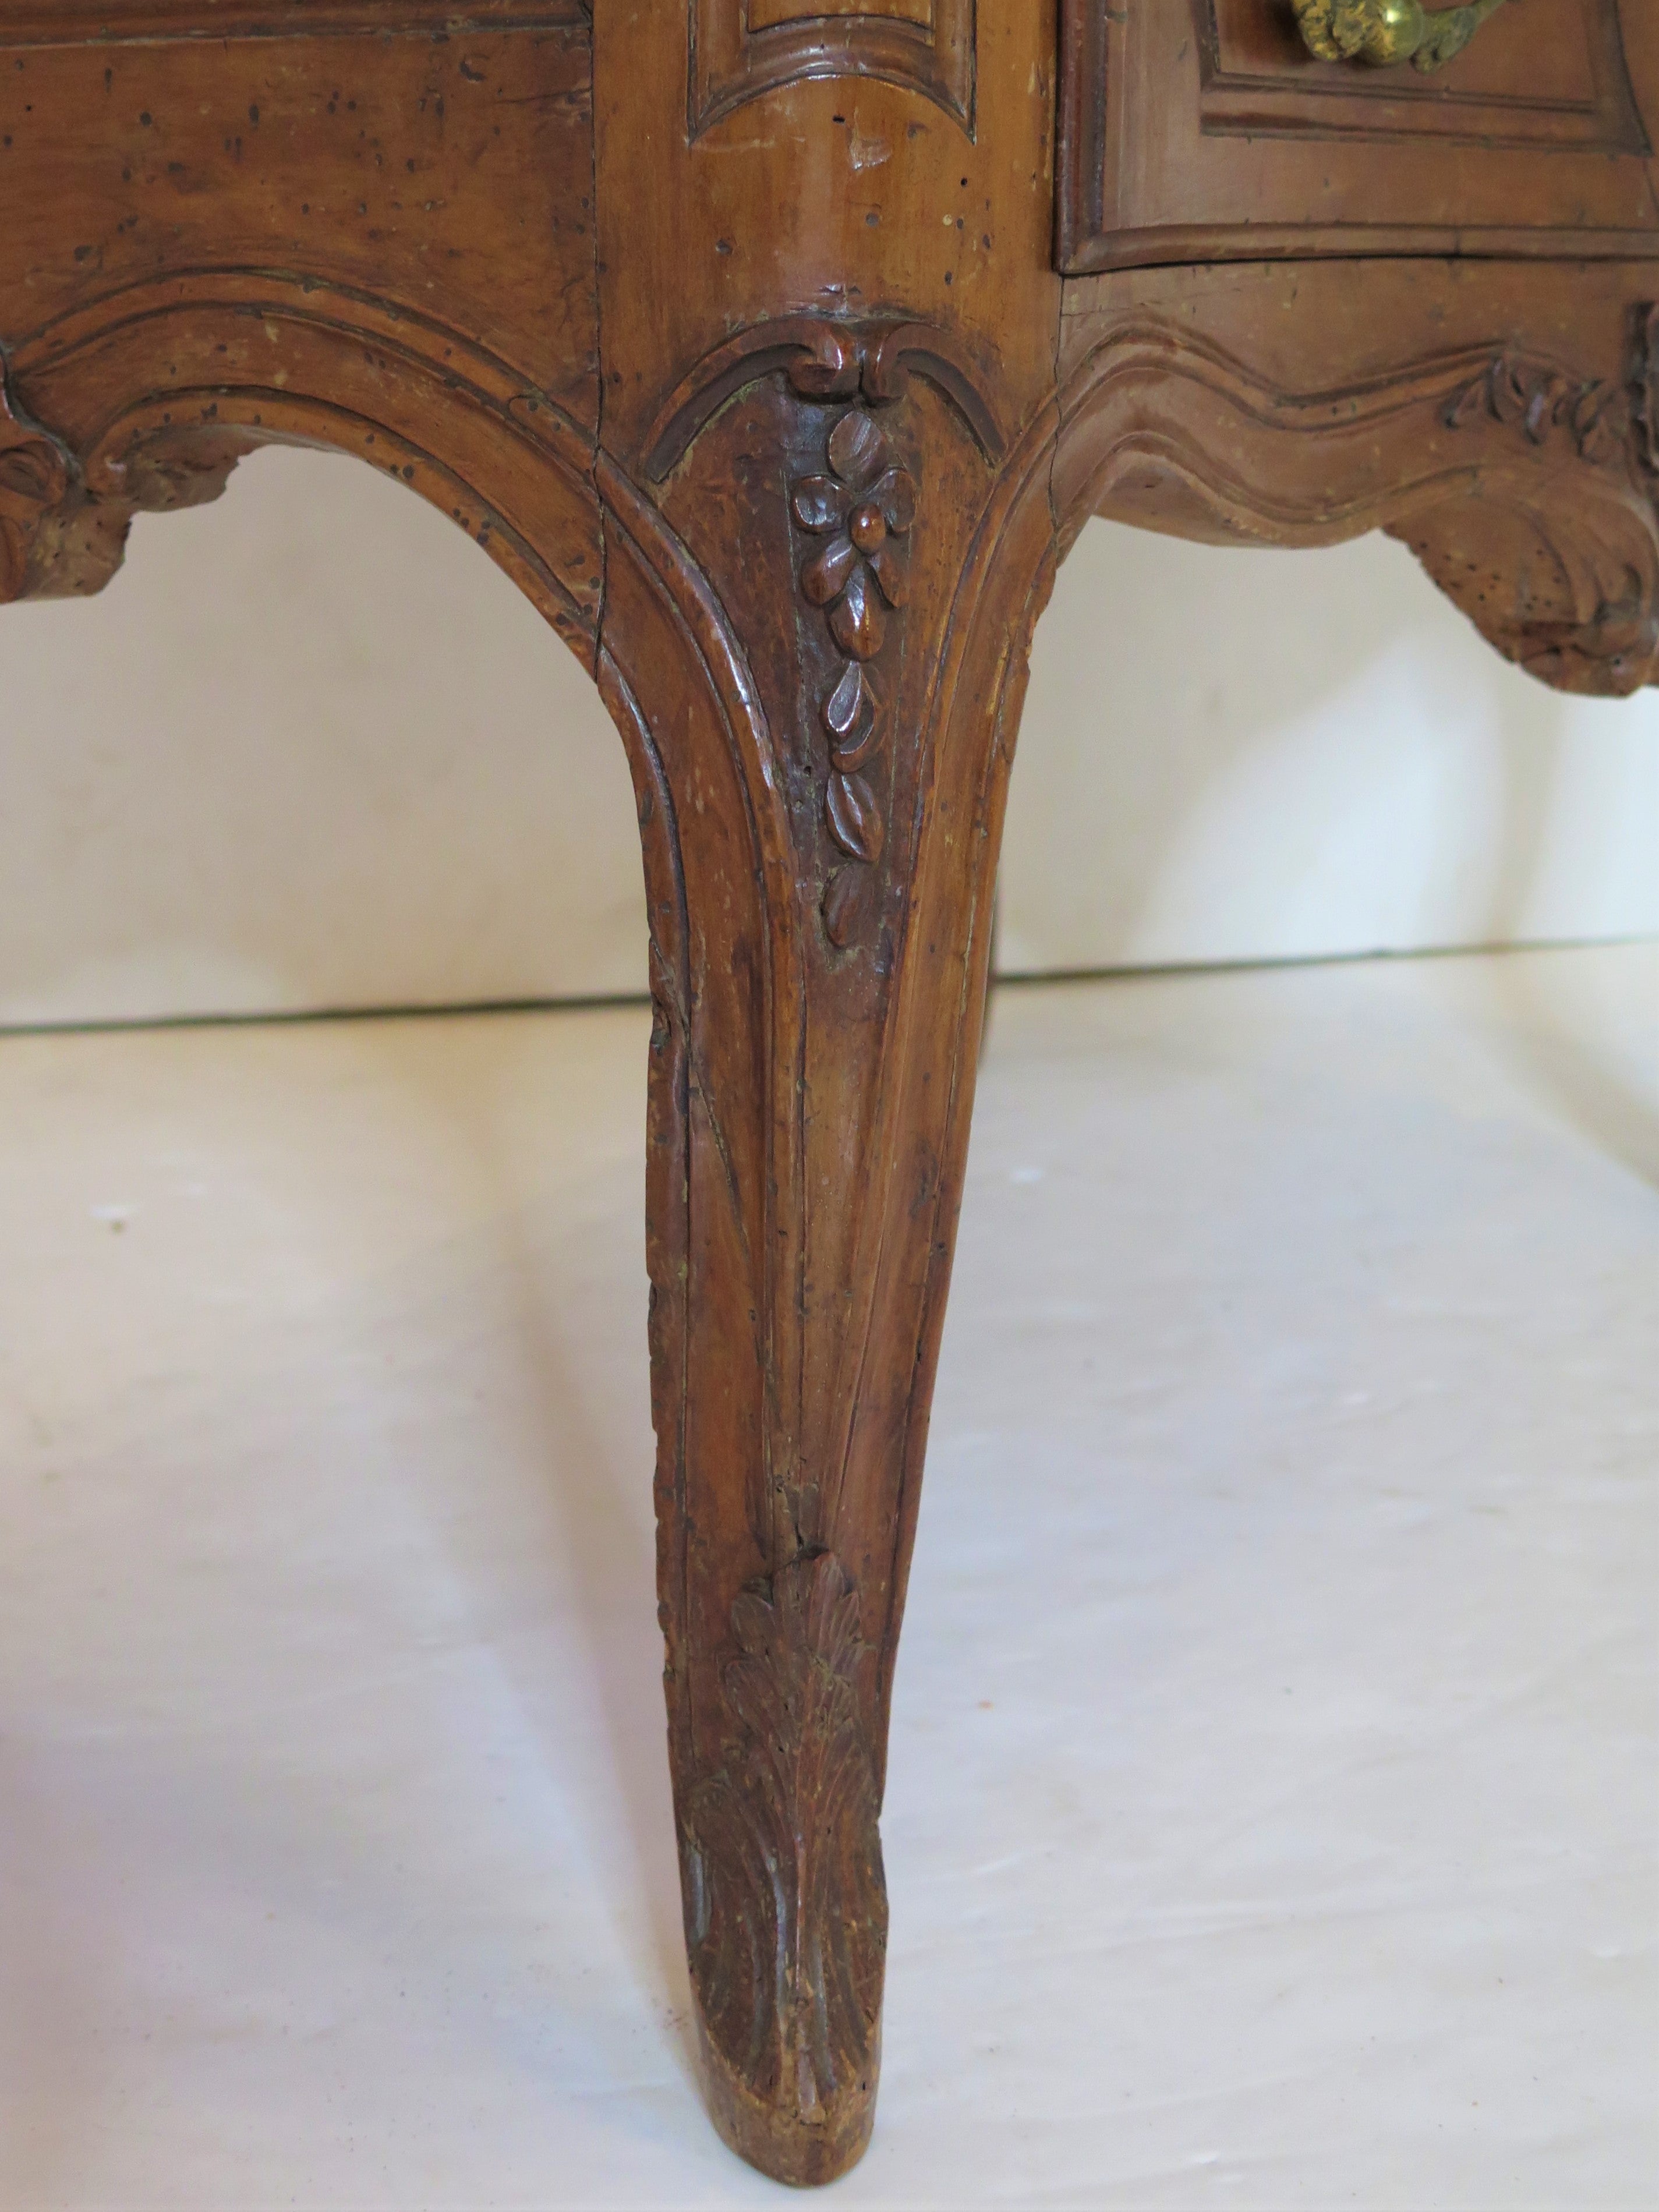 An Elegant 18th Century Louis XV Carved Walnut Two Drawer Commode